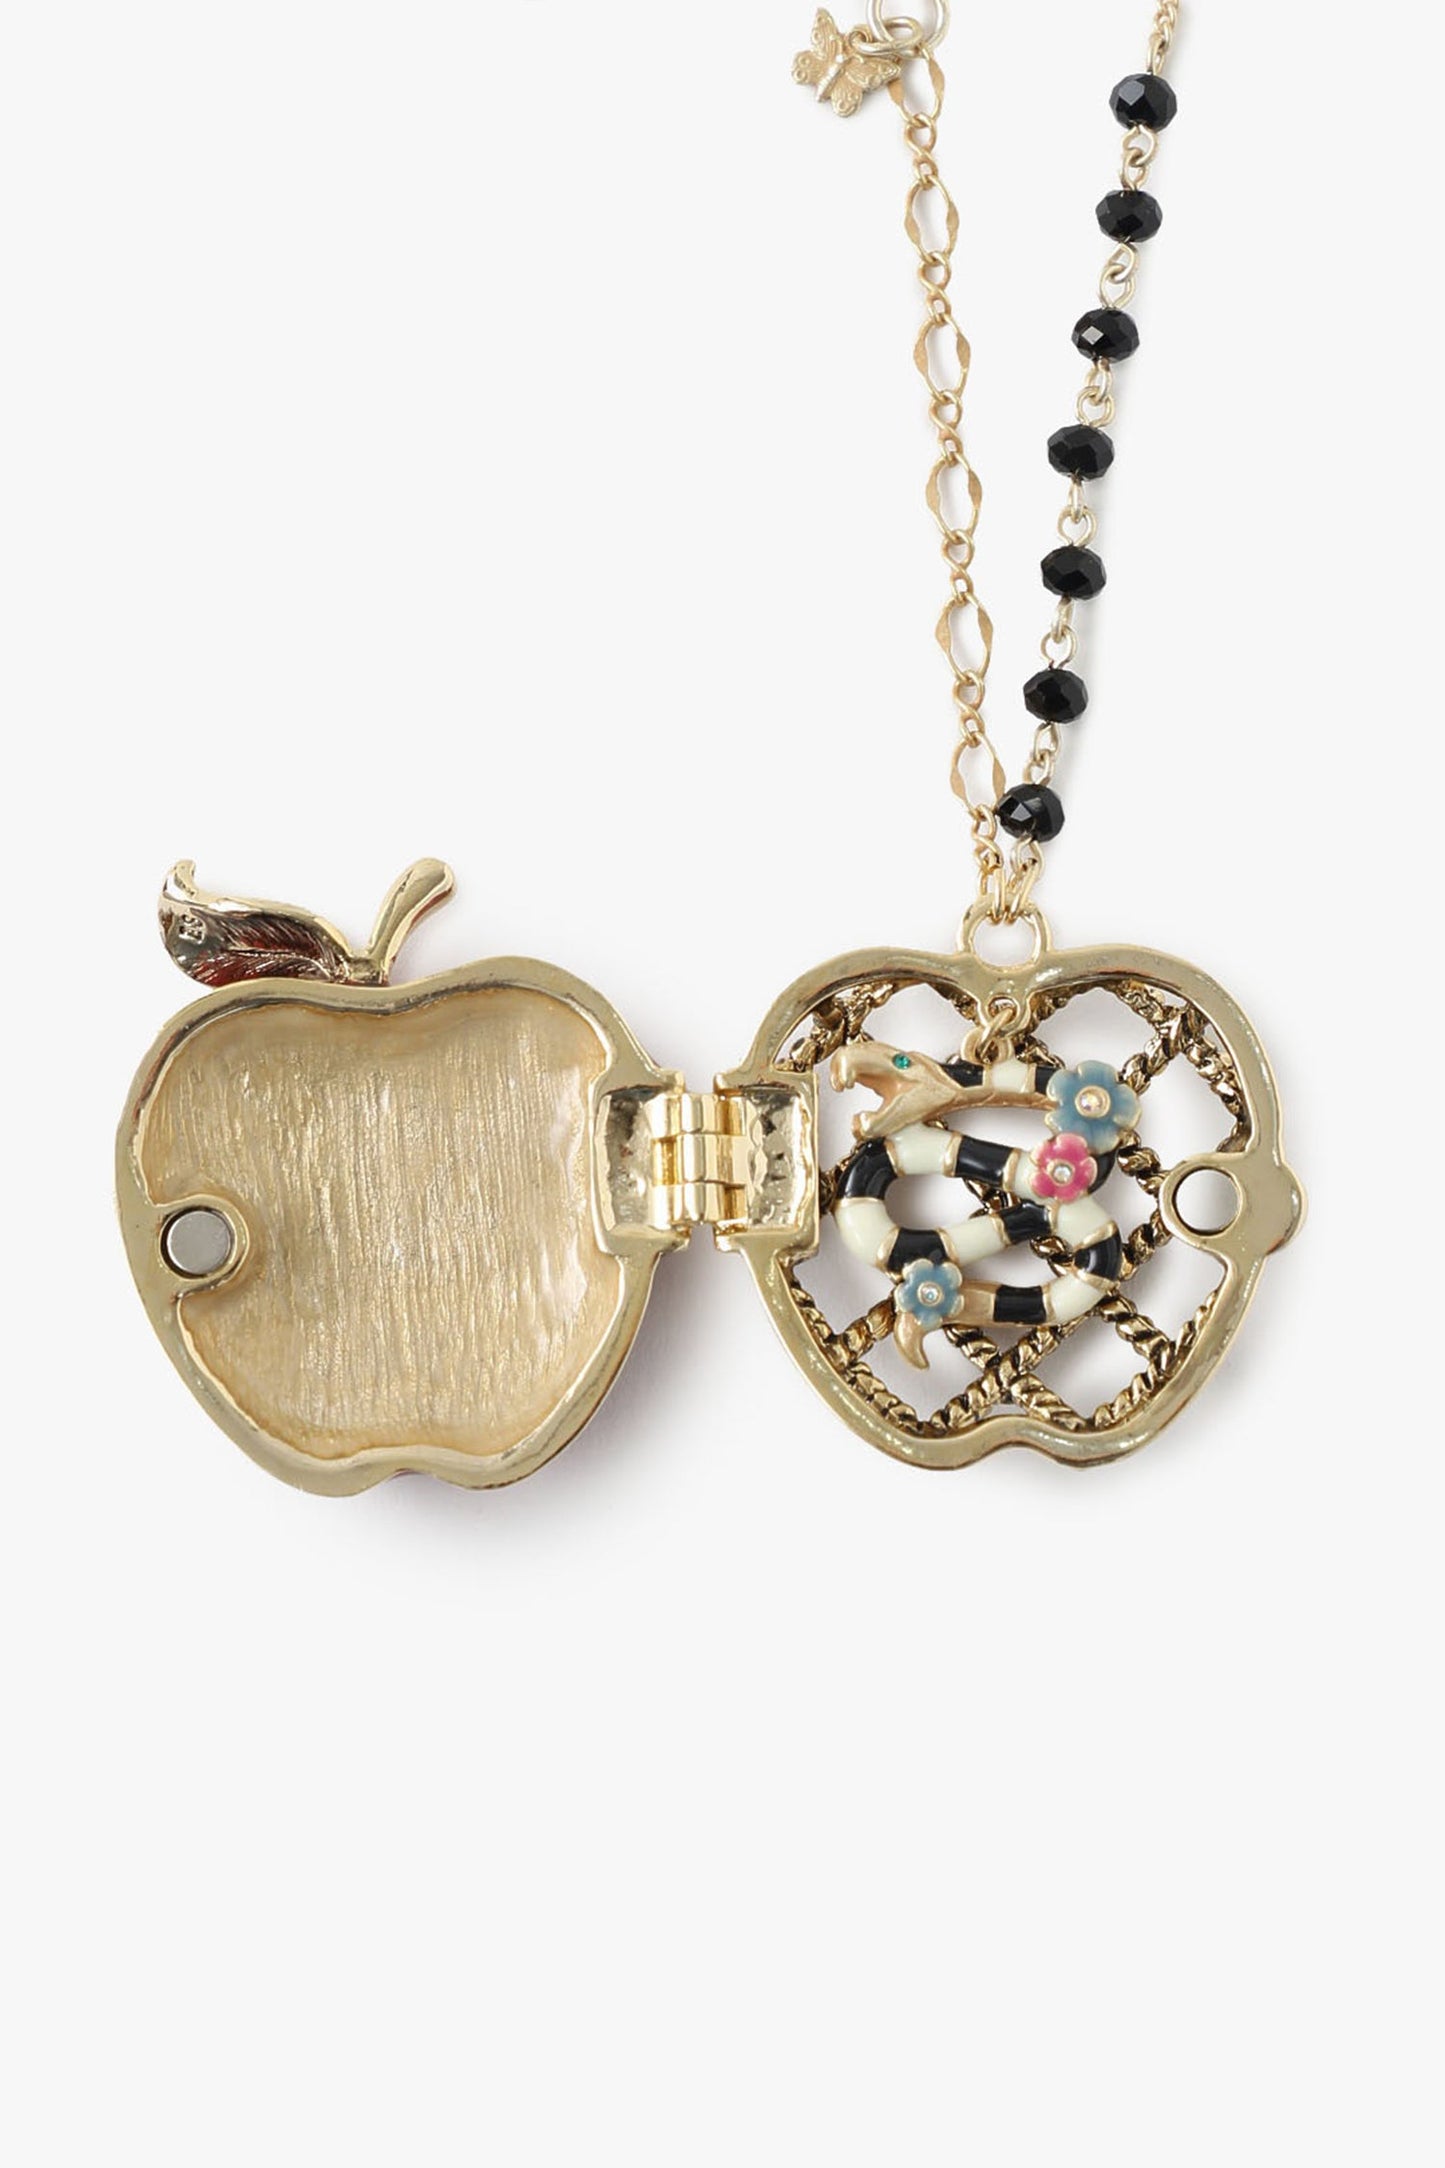 Red Apple Necklace is a locket, closed with magnet, inside is a black/white snake with golden lines